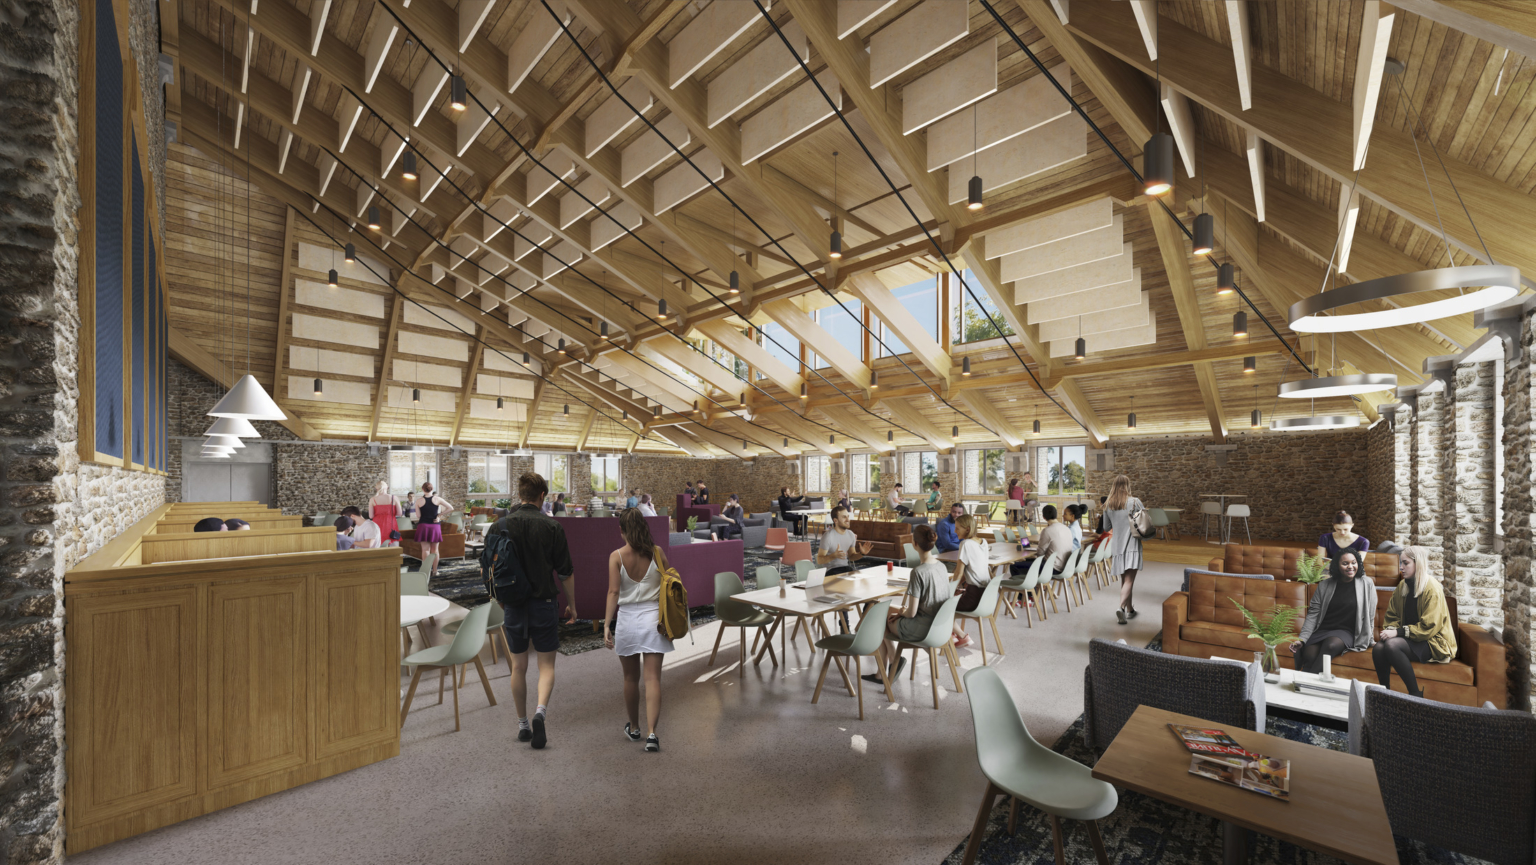 Main dining area with high ceilings, skylights, dining tables, and private seating at Swarthmore College Dining and Community Commons.